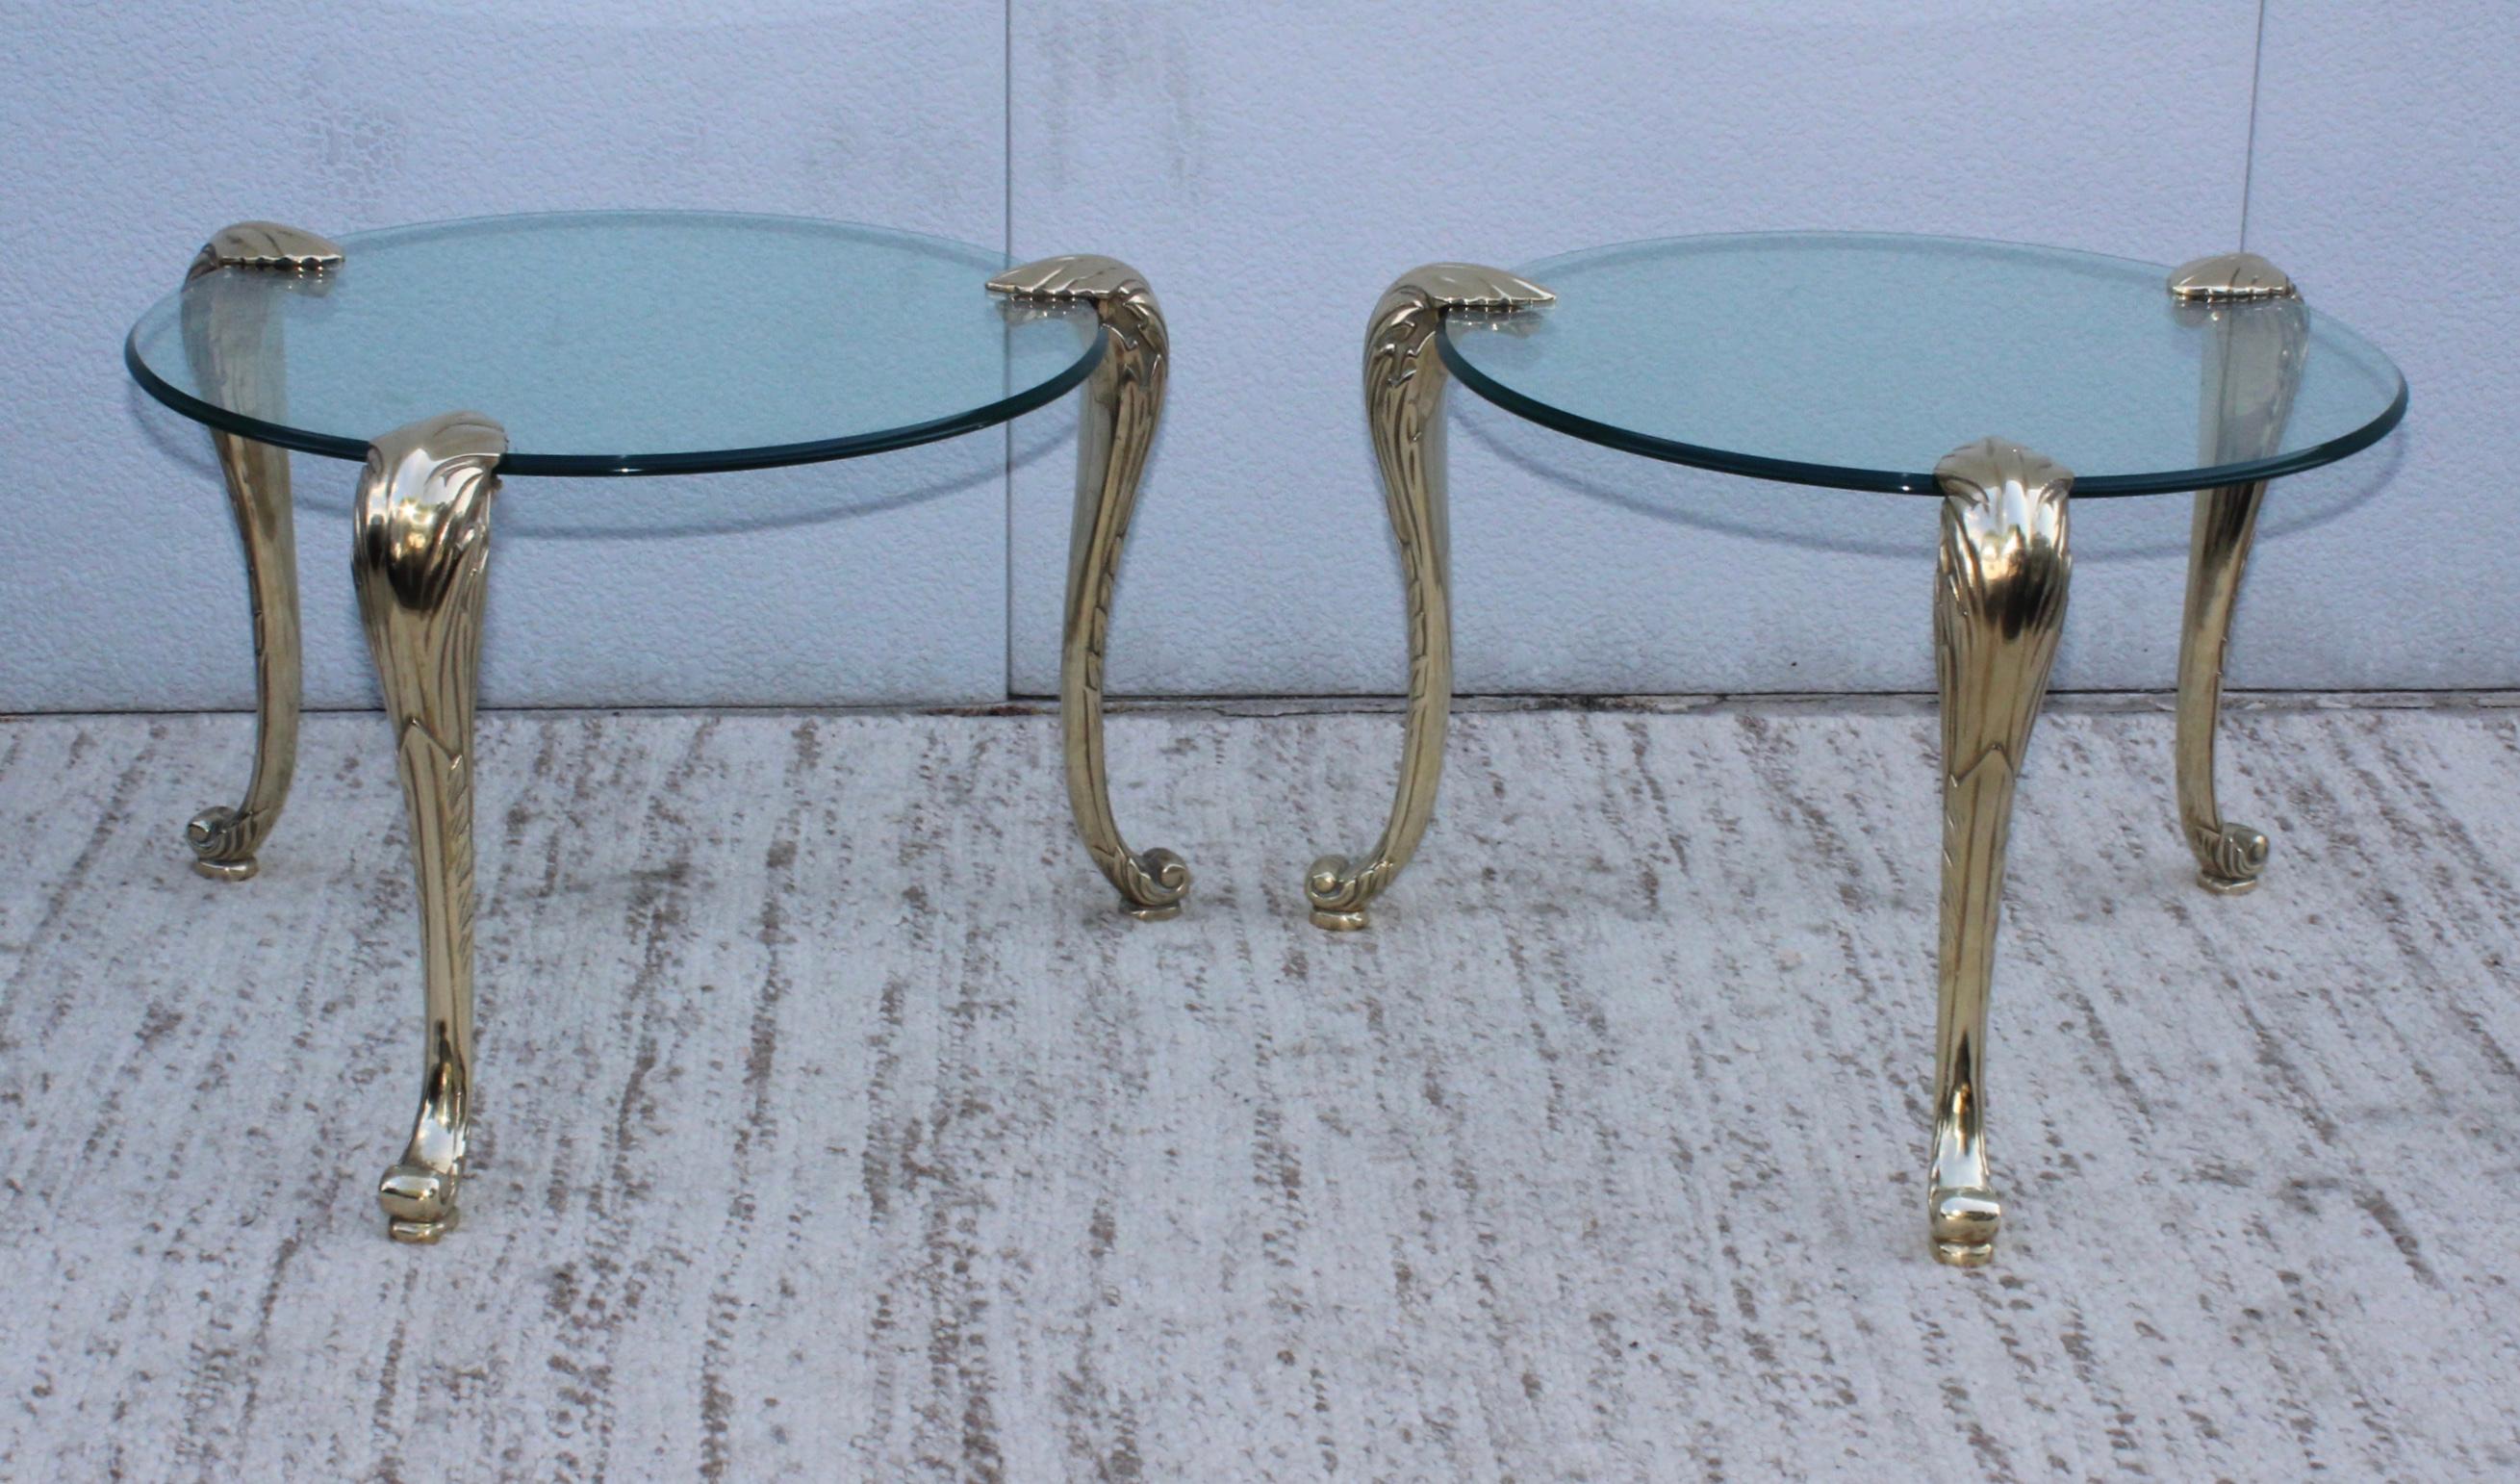 1970s modern large pair of brass legs with beveled glass tripod side tables.